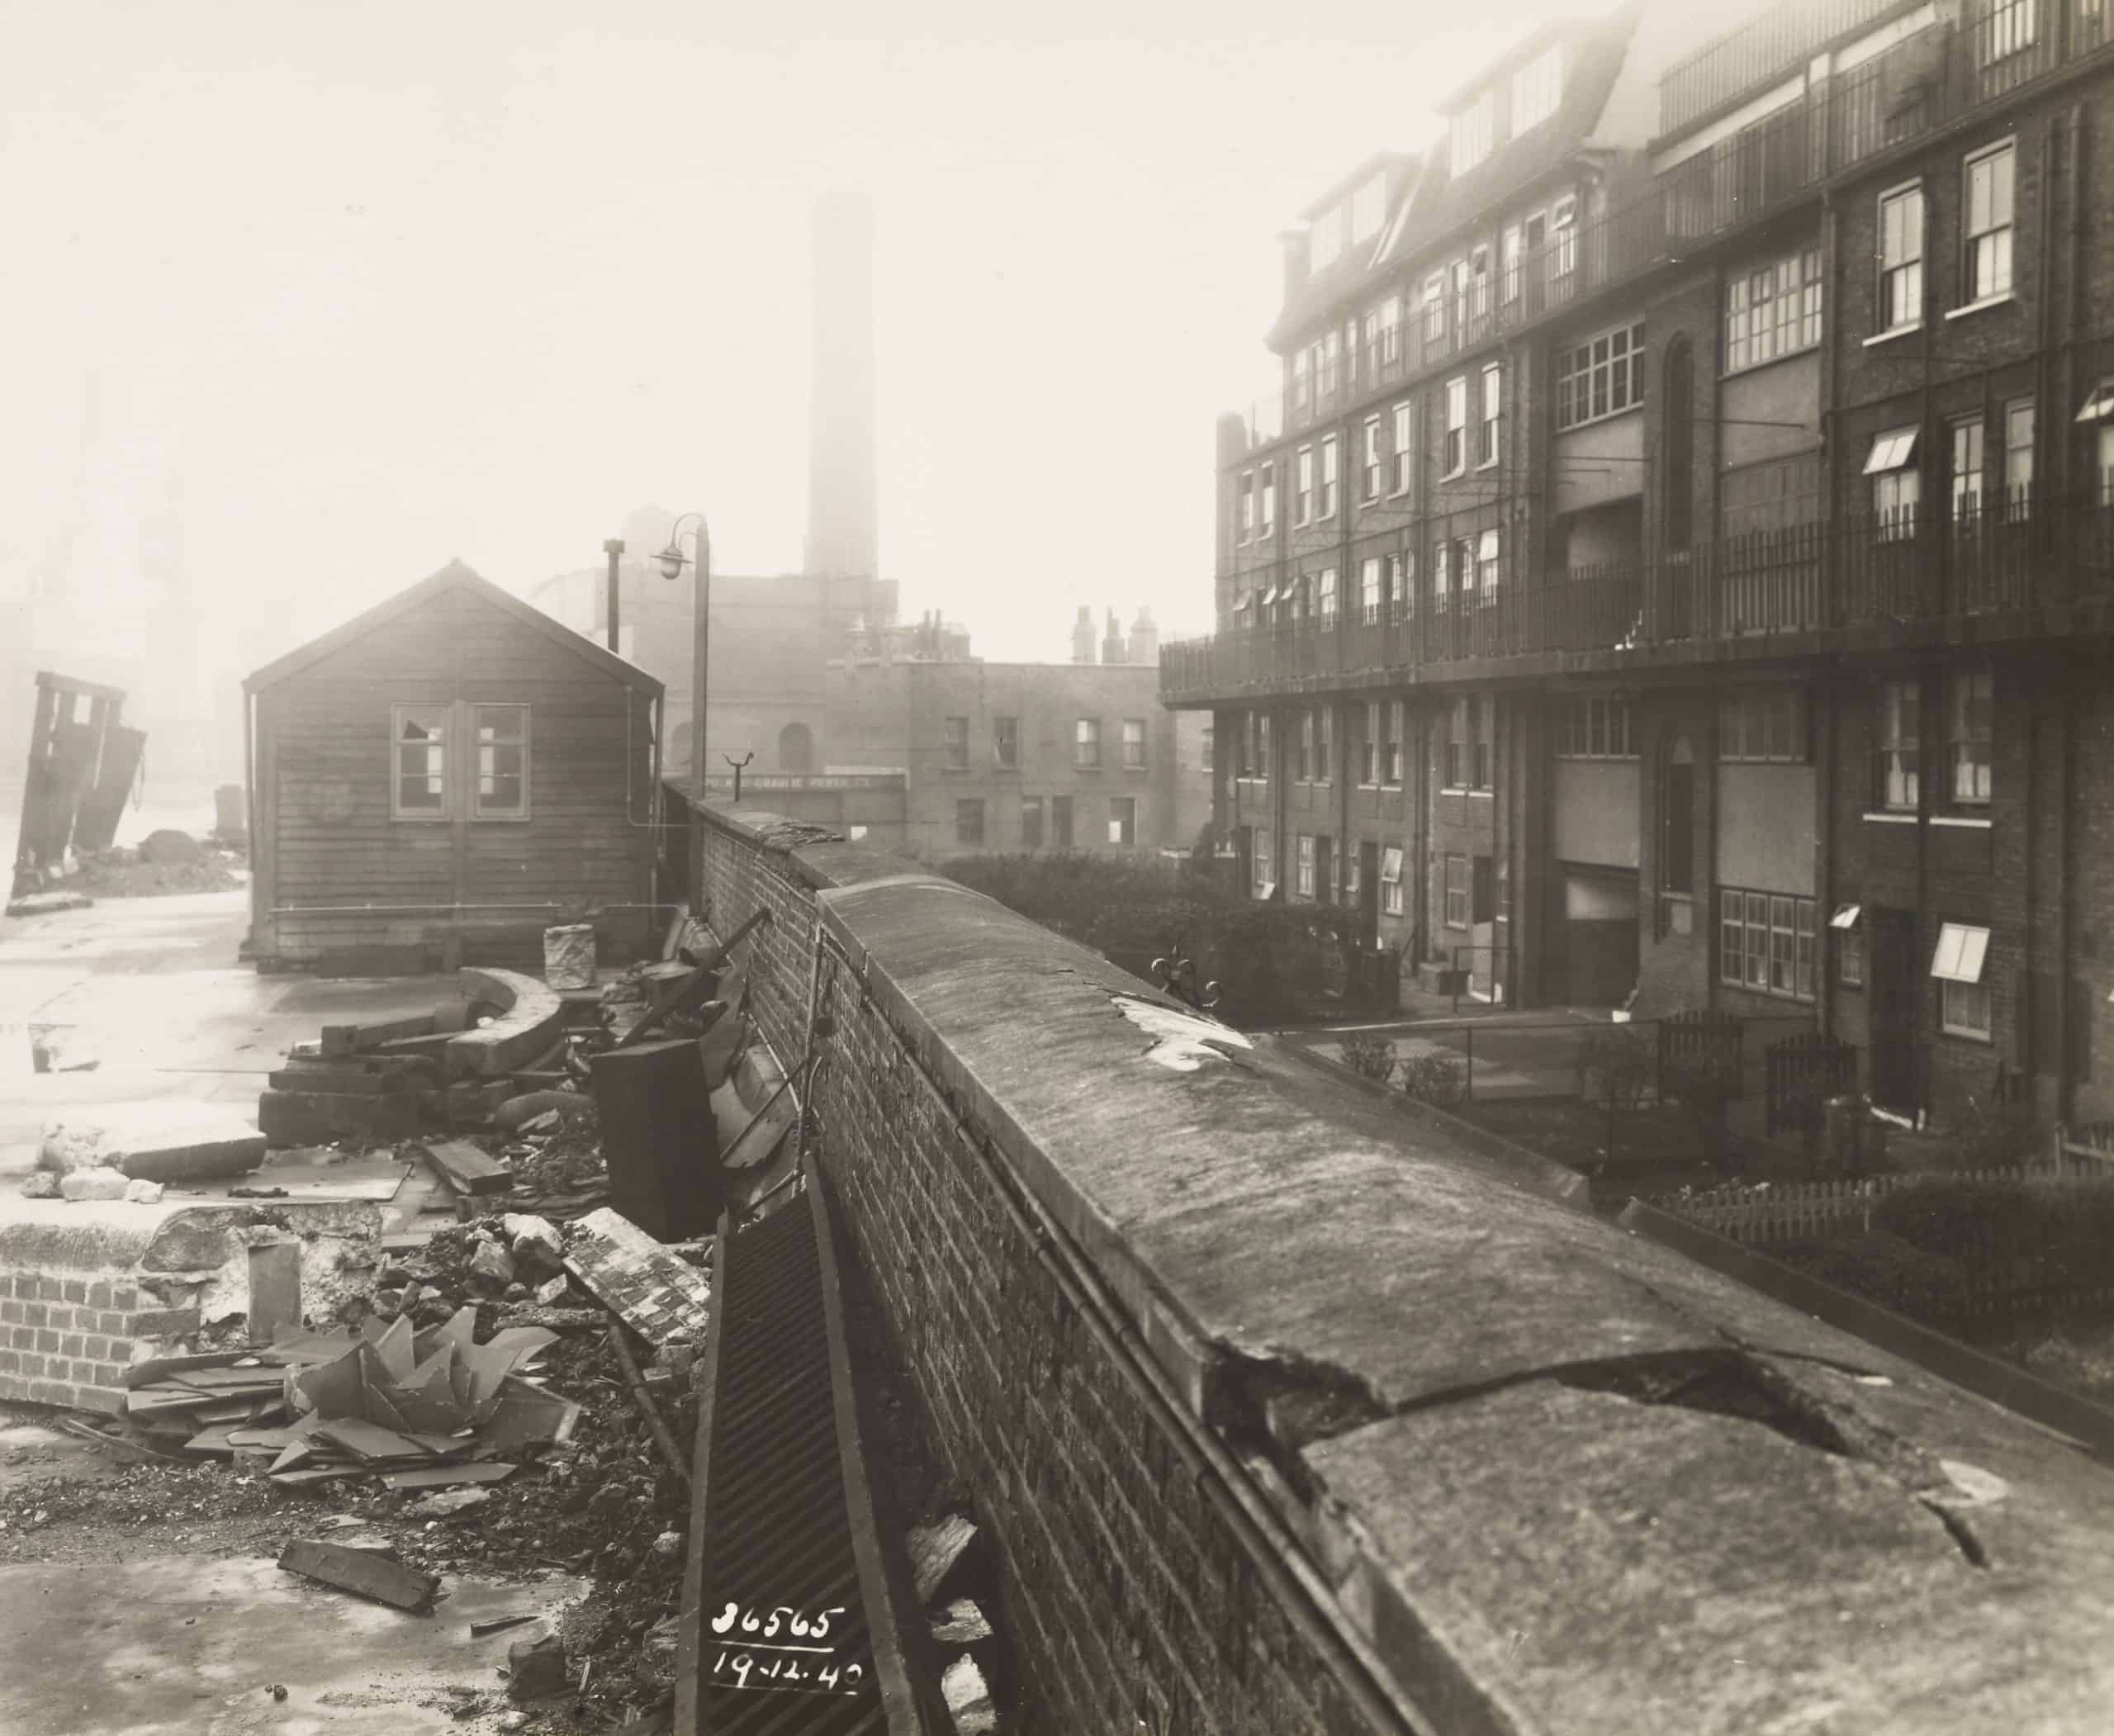 WWII Bomb damage to London Dock. Milk Yard Boundary Wall. South side of Shadwell Old Basin, looking east.
Date of air raid 8-9/12/1940
Date: 19/12/1940